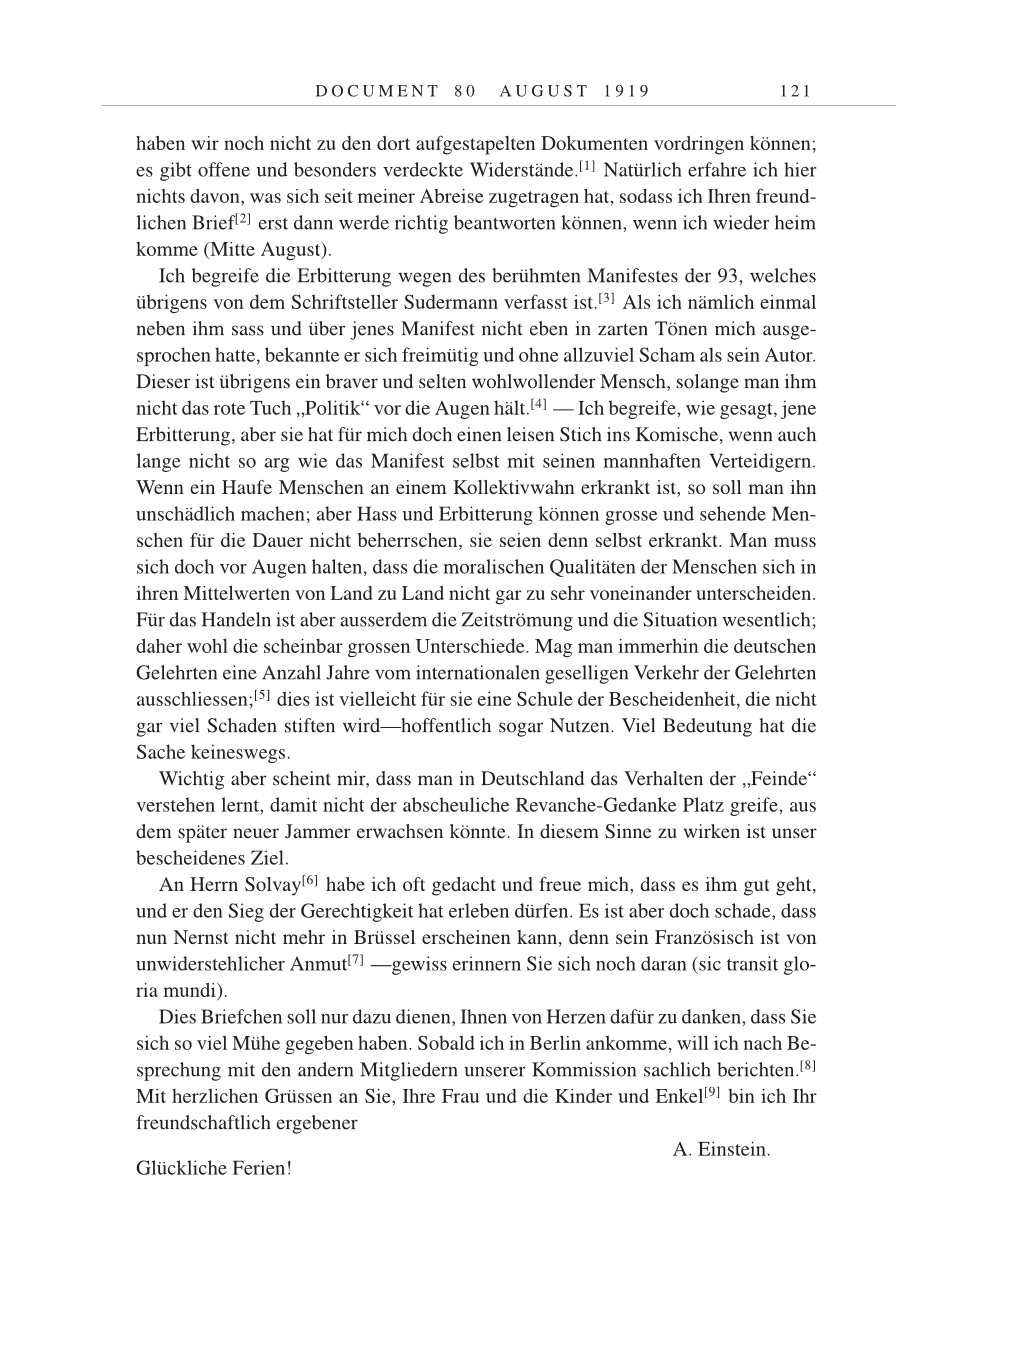 Volume 9: The Berlin Years: Correspondence January 1919-April 1920 page 121